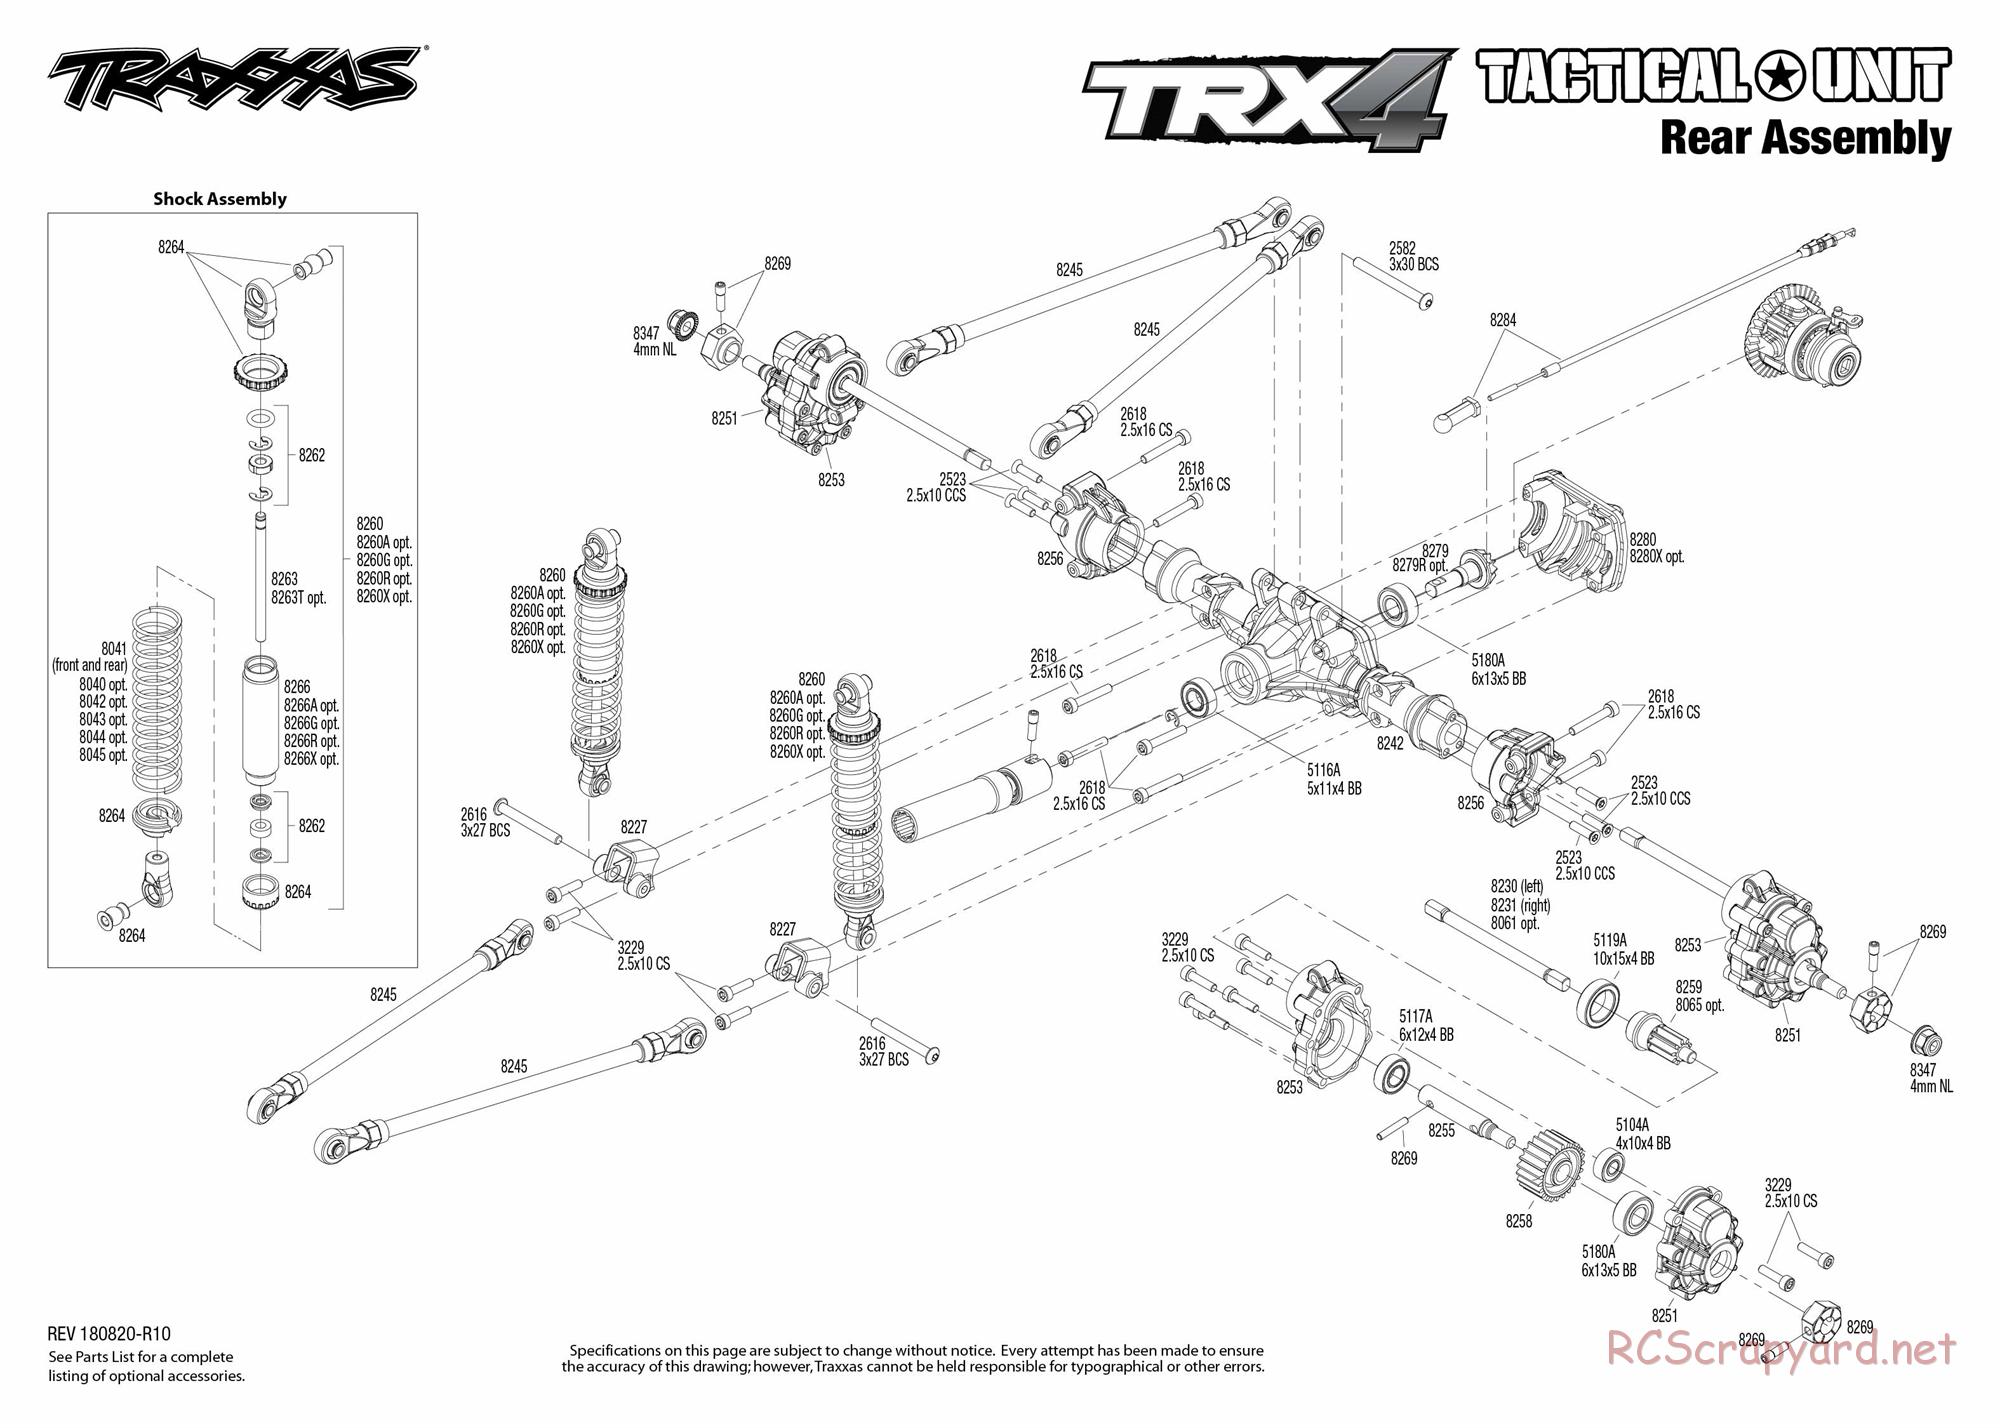 Traxxas - TRX-4 Tactical Unit (2018) - Exploded Views - Page 5